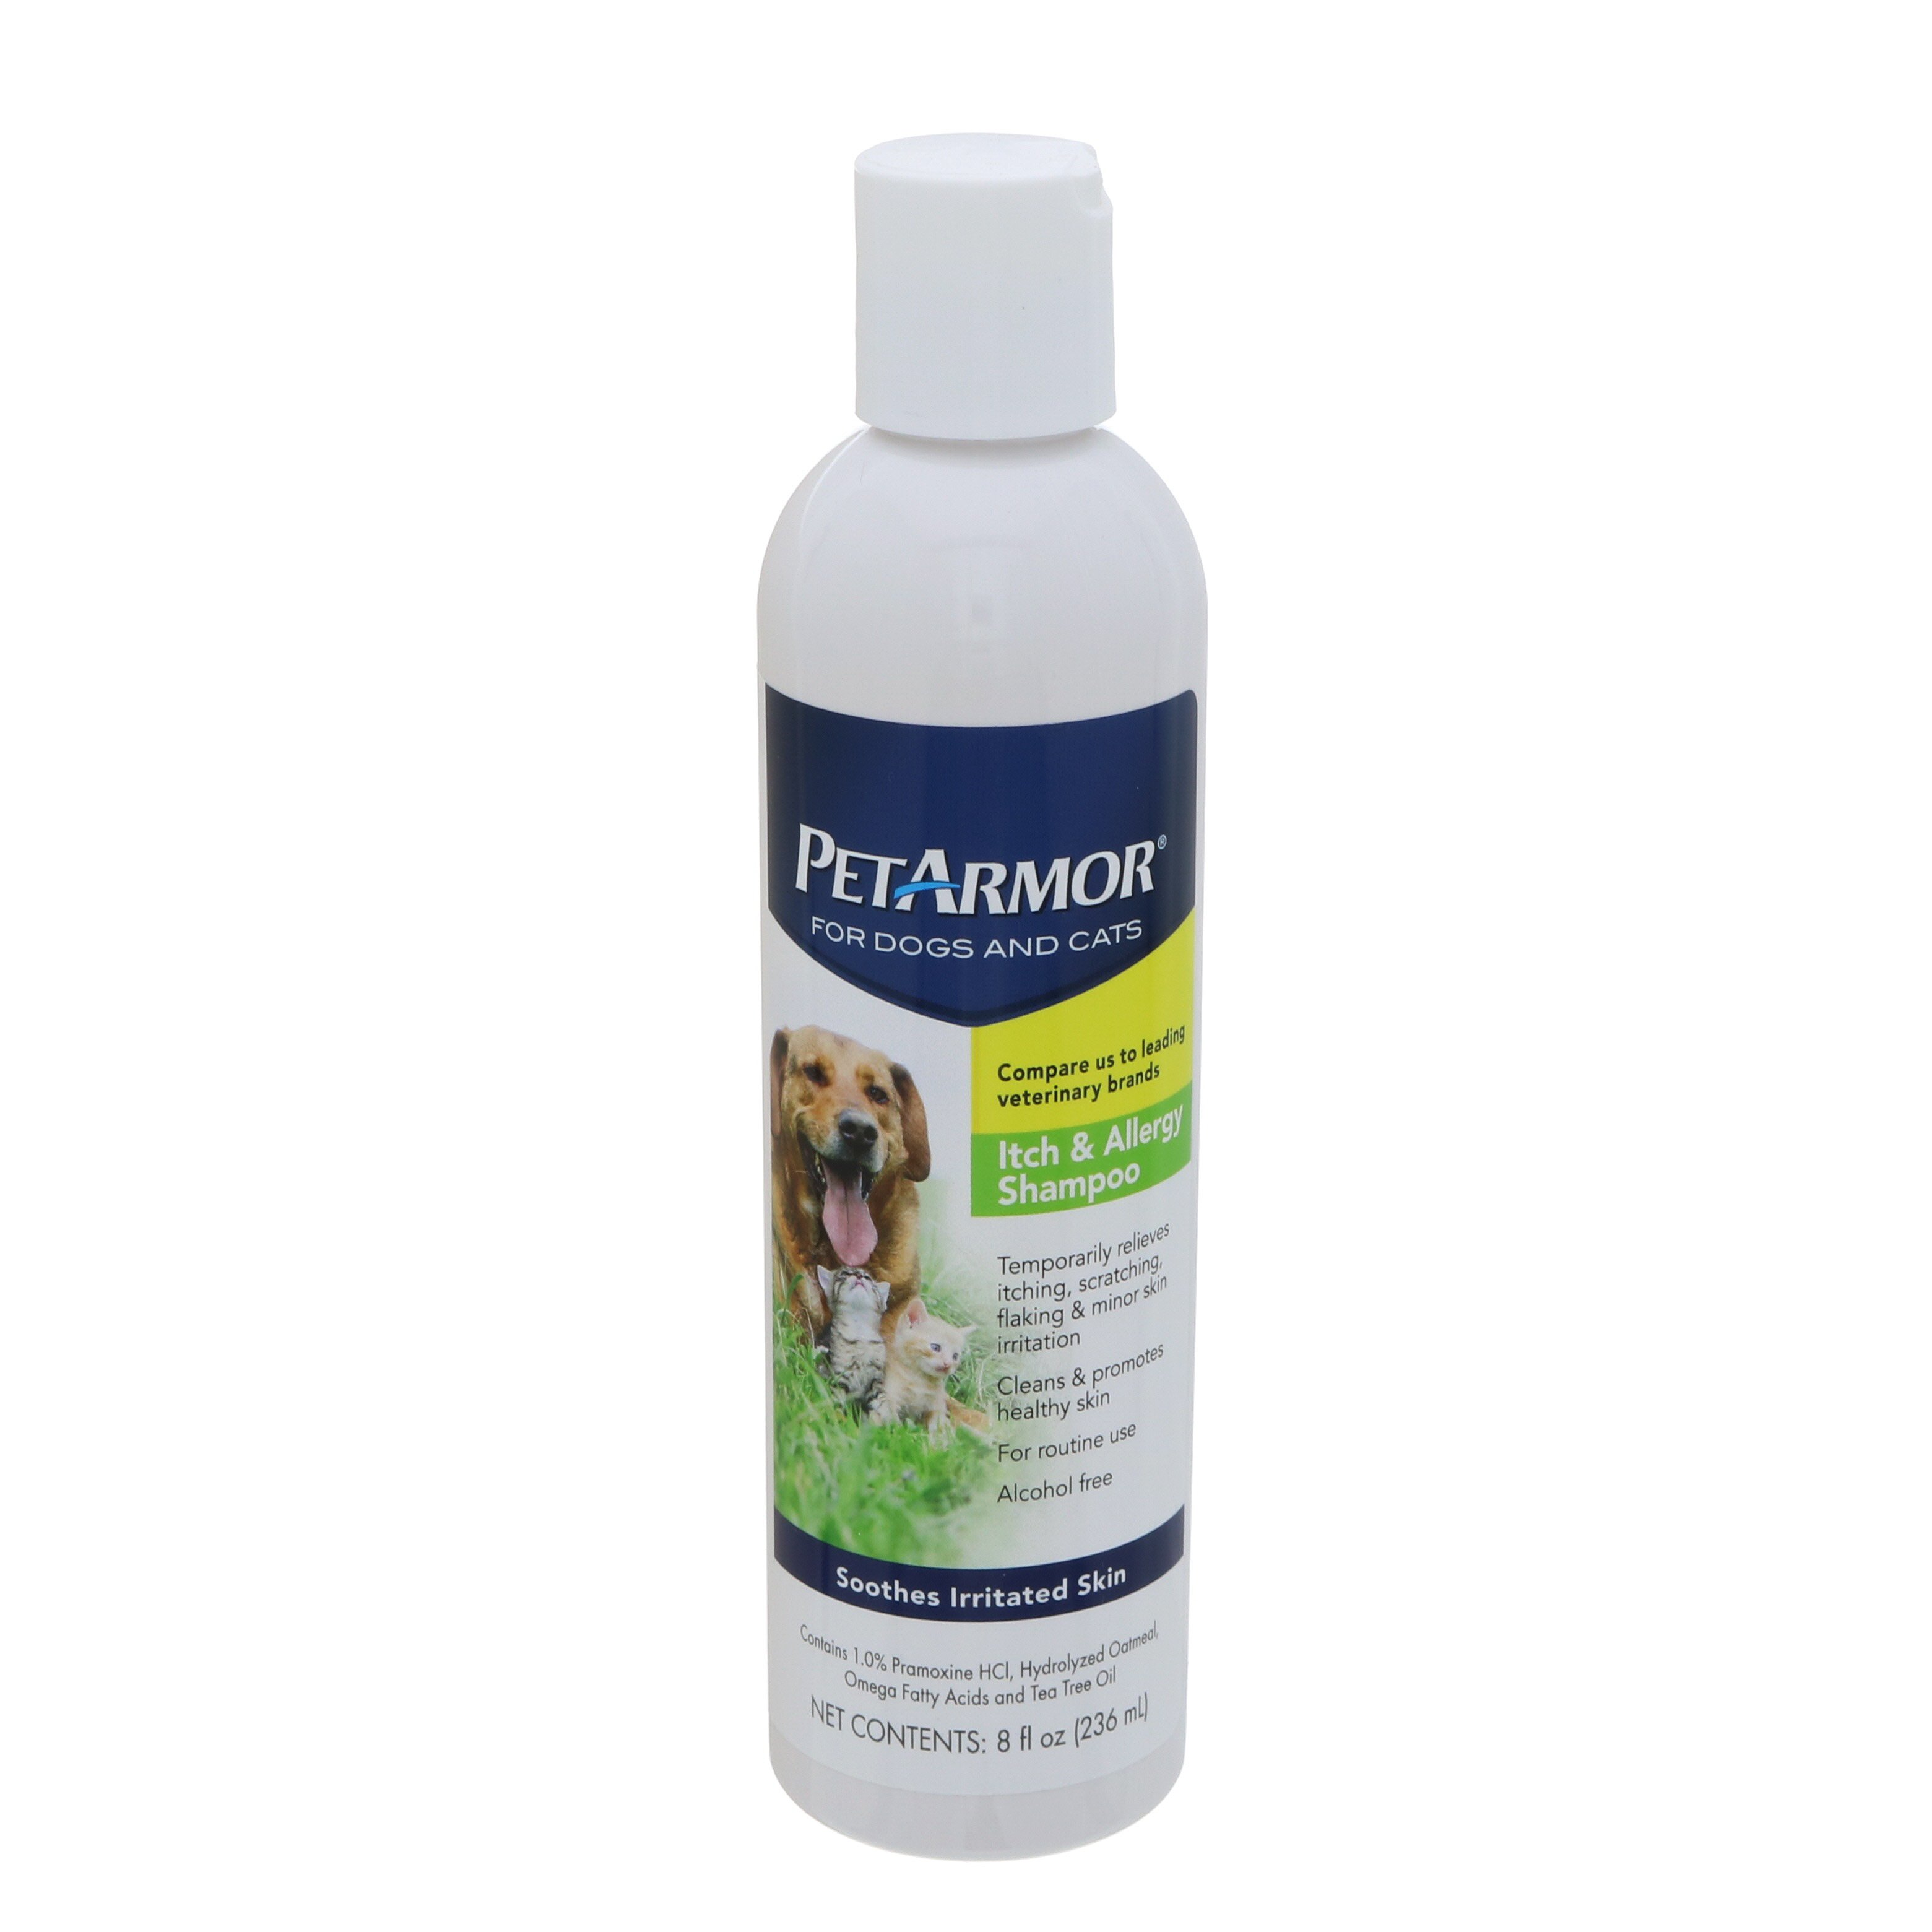 PetArmor Itch & Allergy Shampoo For Dogs & Cats Shop Healthcare at HEB